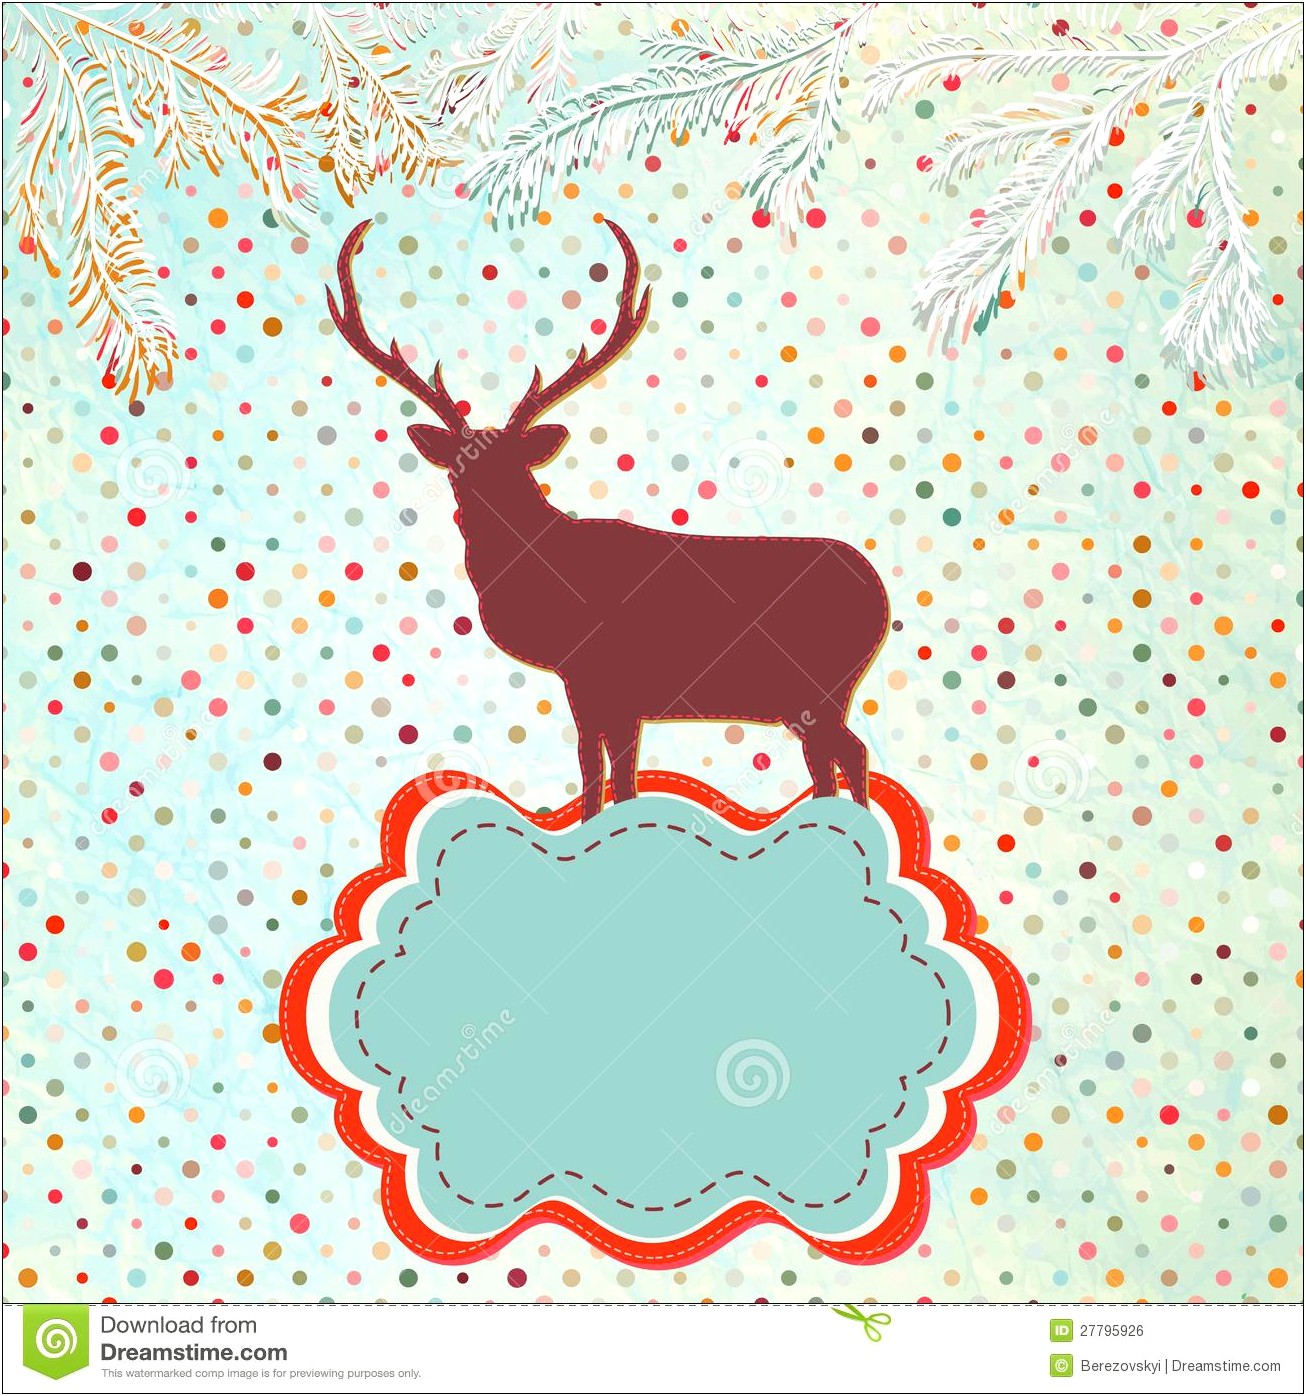 Christmas Invitation Card Template Free Download